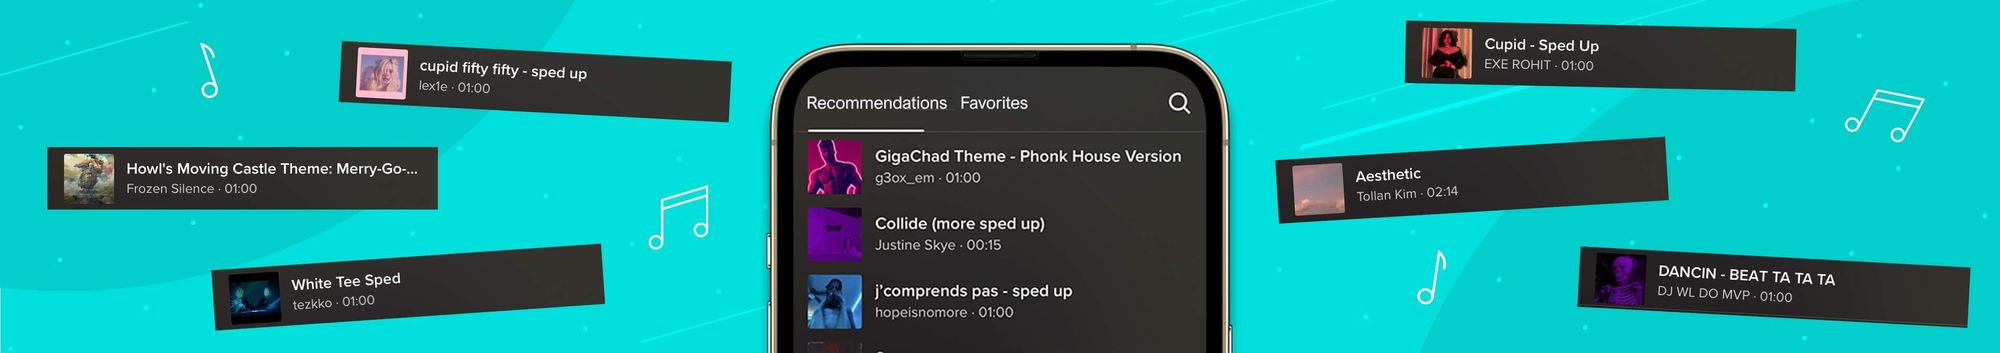 Image of TikTok interface displaying different TikTok sounds that a creator can select.